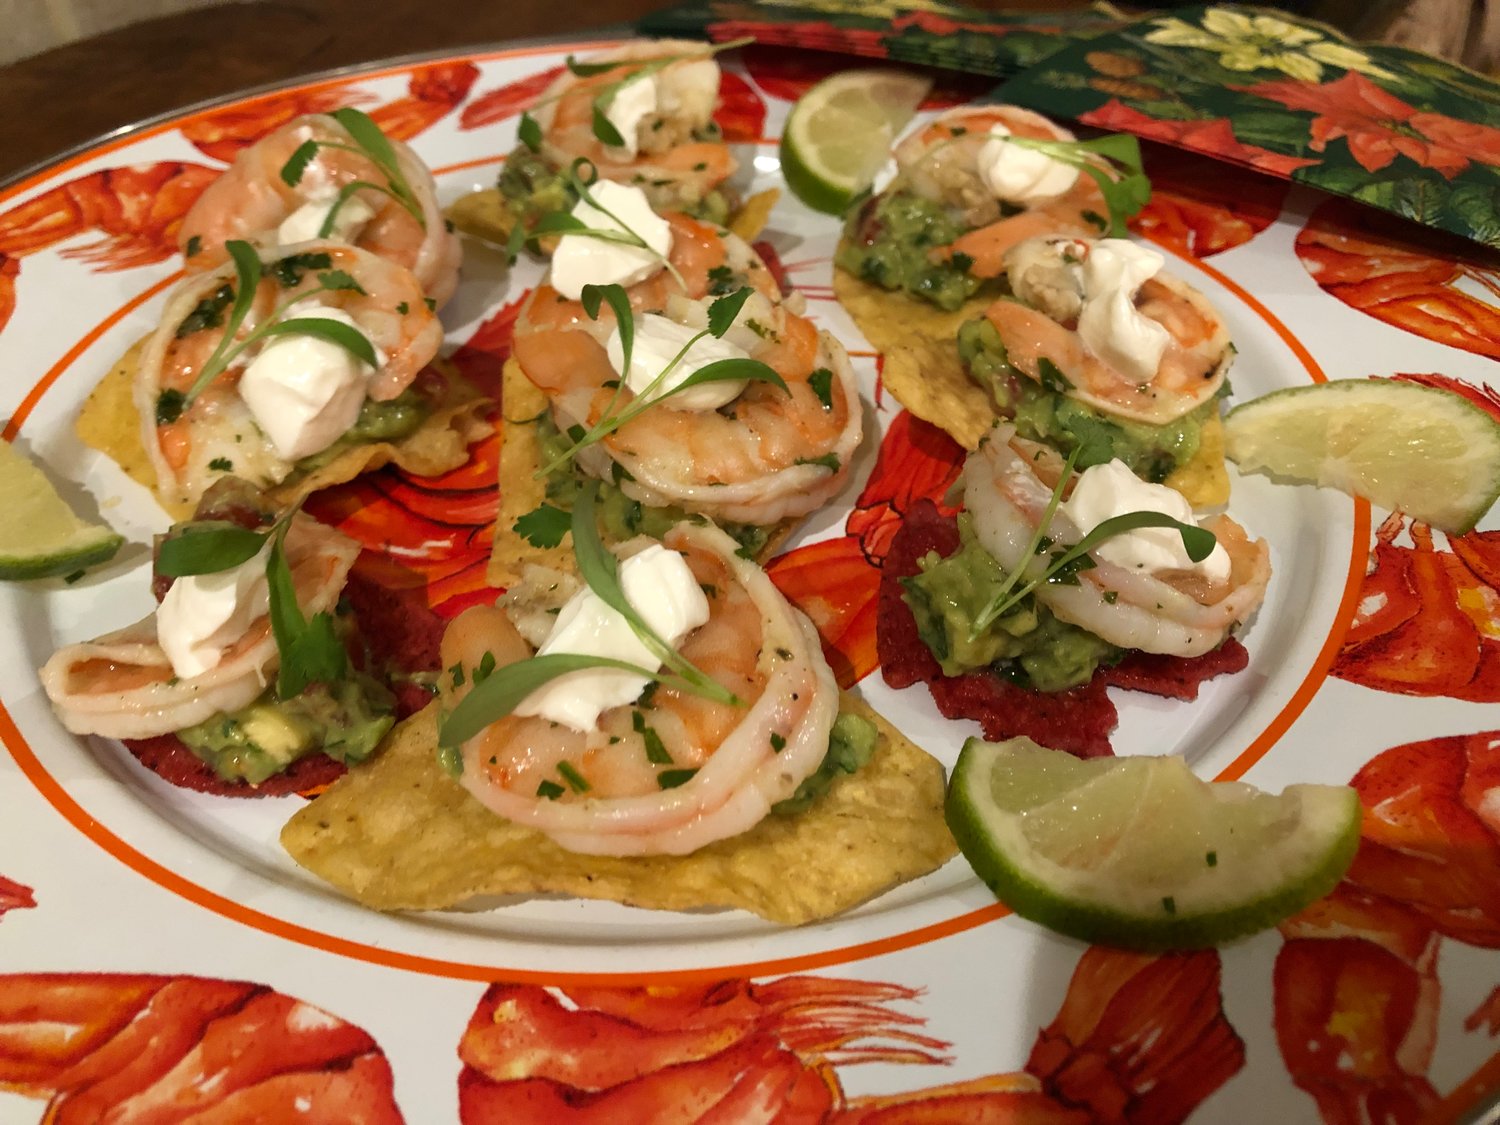 This Guacamole Shrimp Tostada is based on a recipe by “Victory Garden” cookbook author Marian Morash.